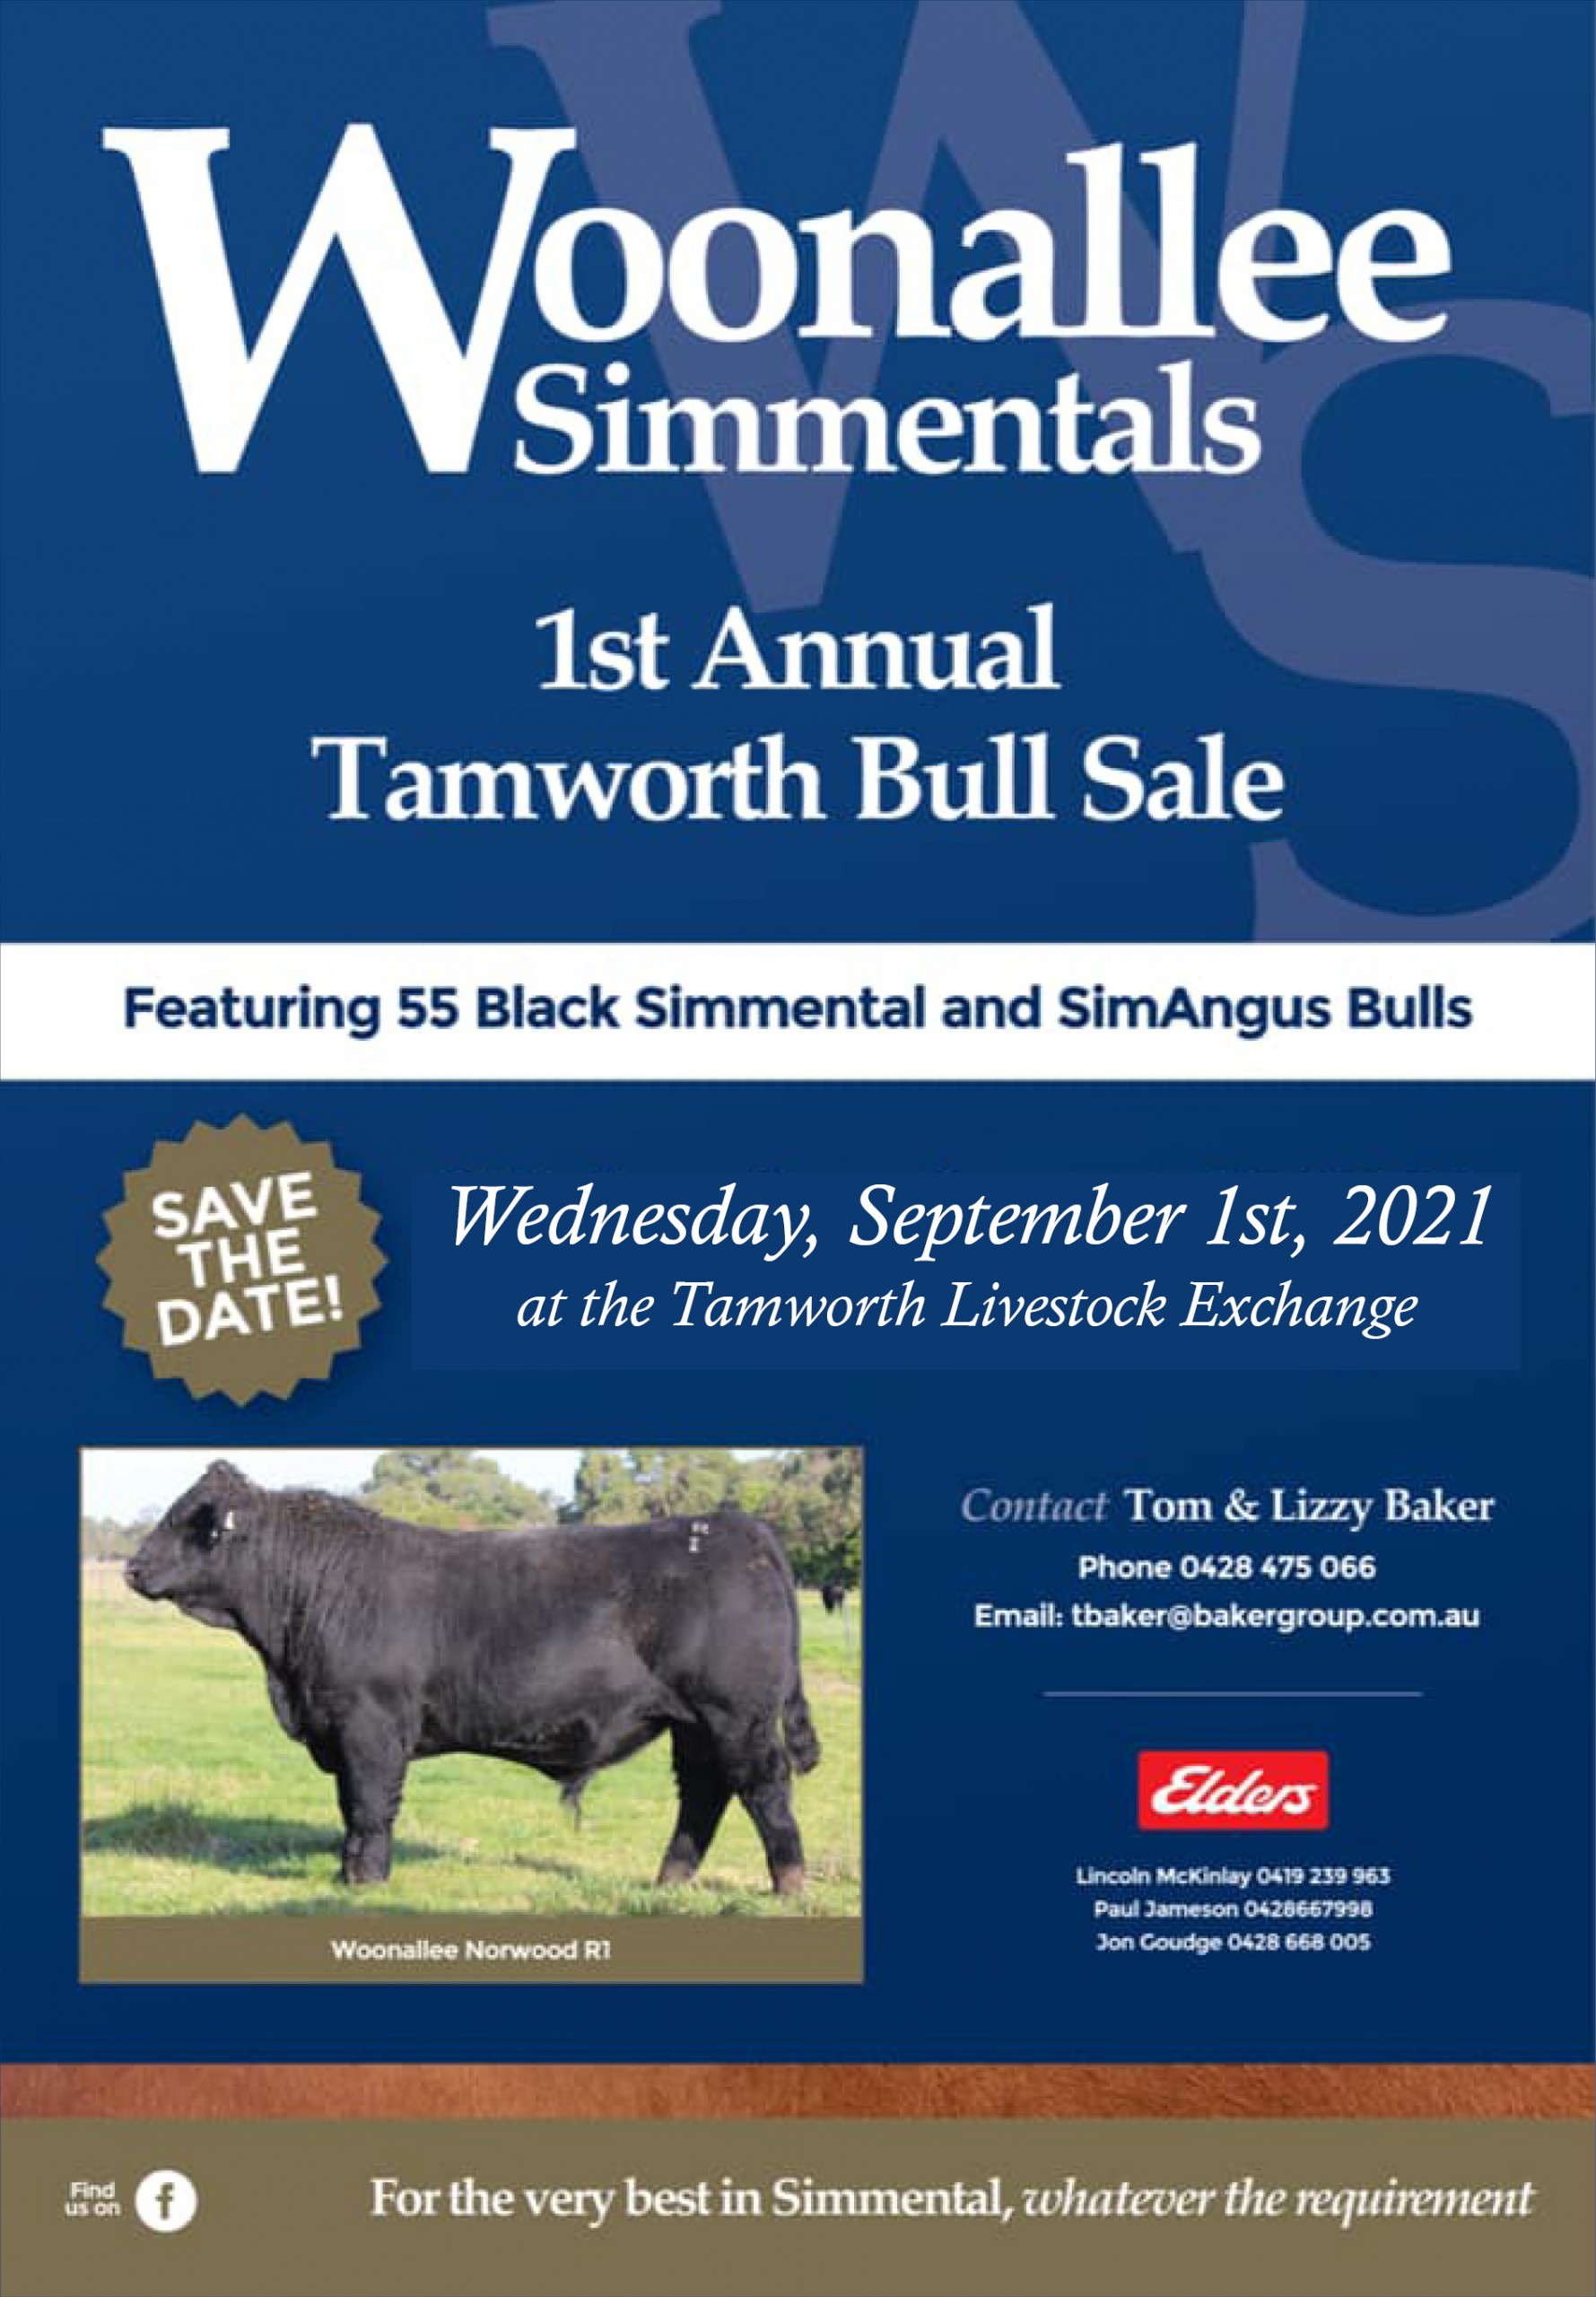 Woonallee Simmentals 1st Annual Tamworth Bull Sale